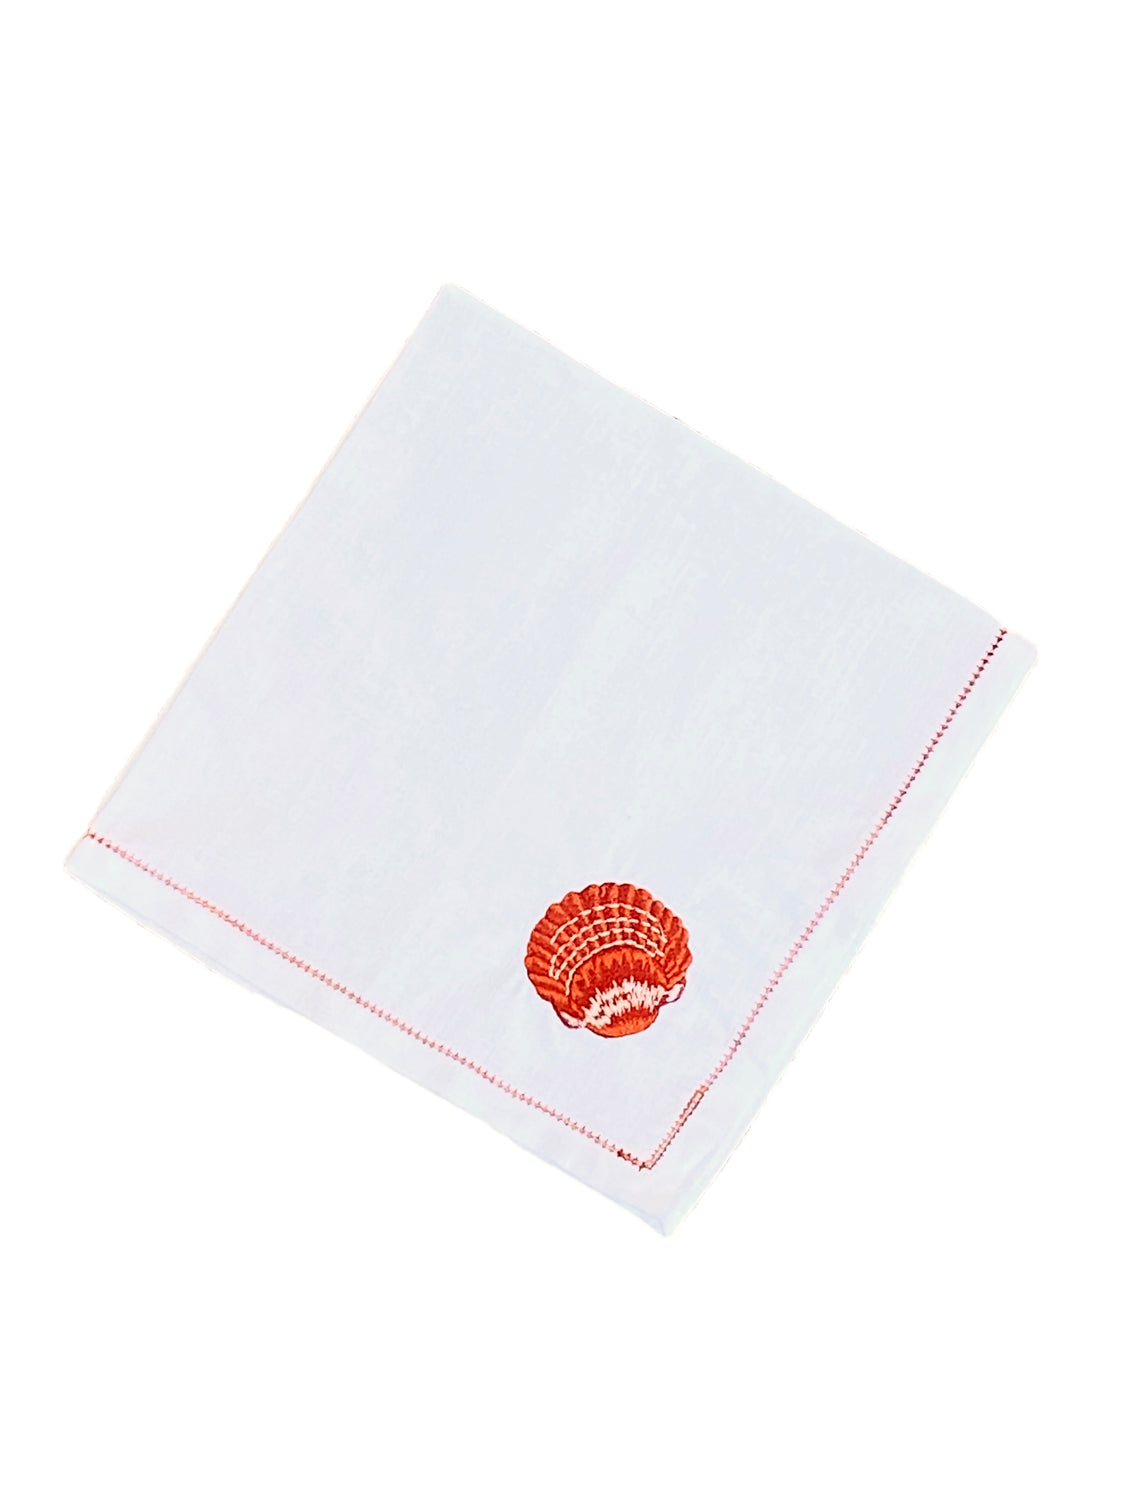 Hand Embroidered Coral Scallop Shell and Hemstitch Trim Dinner Napkins, Set of 4